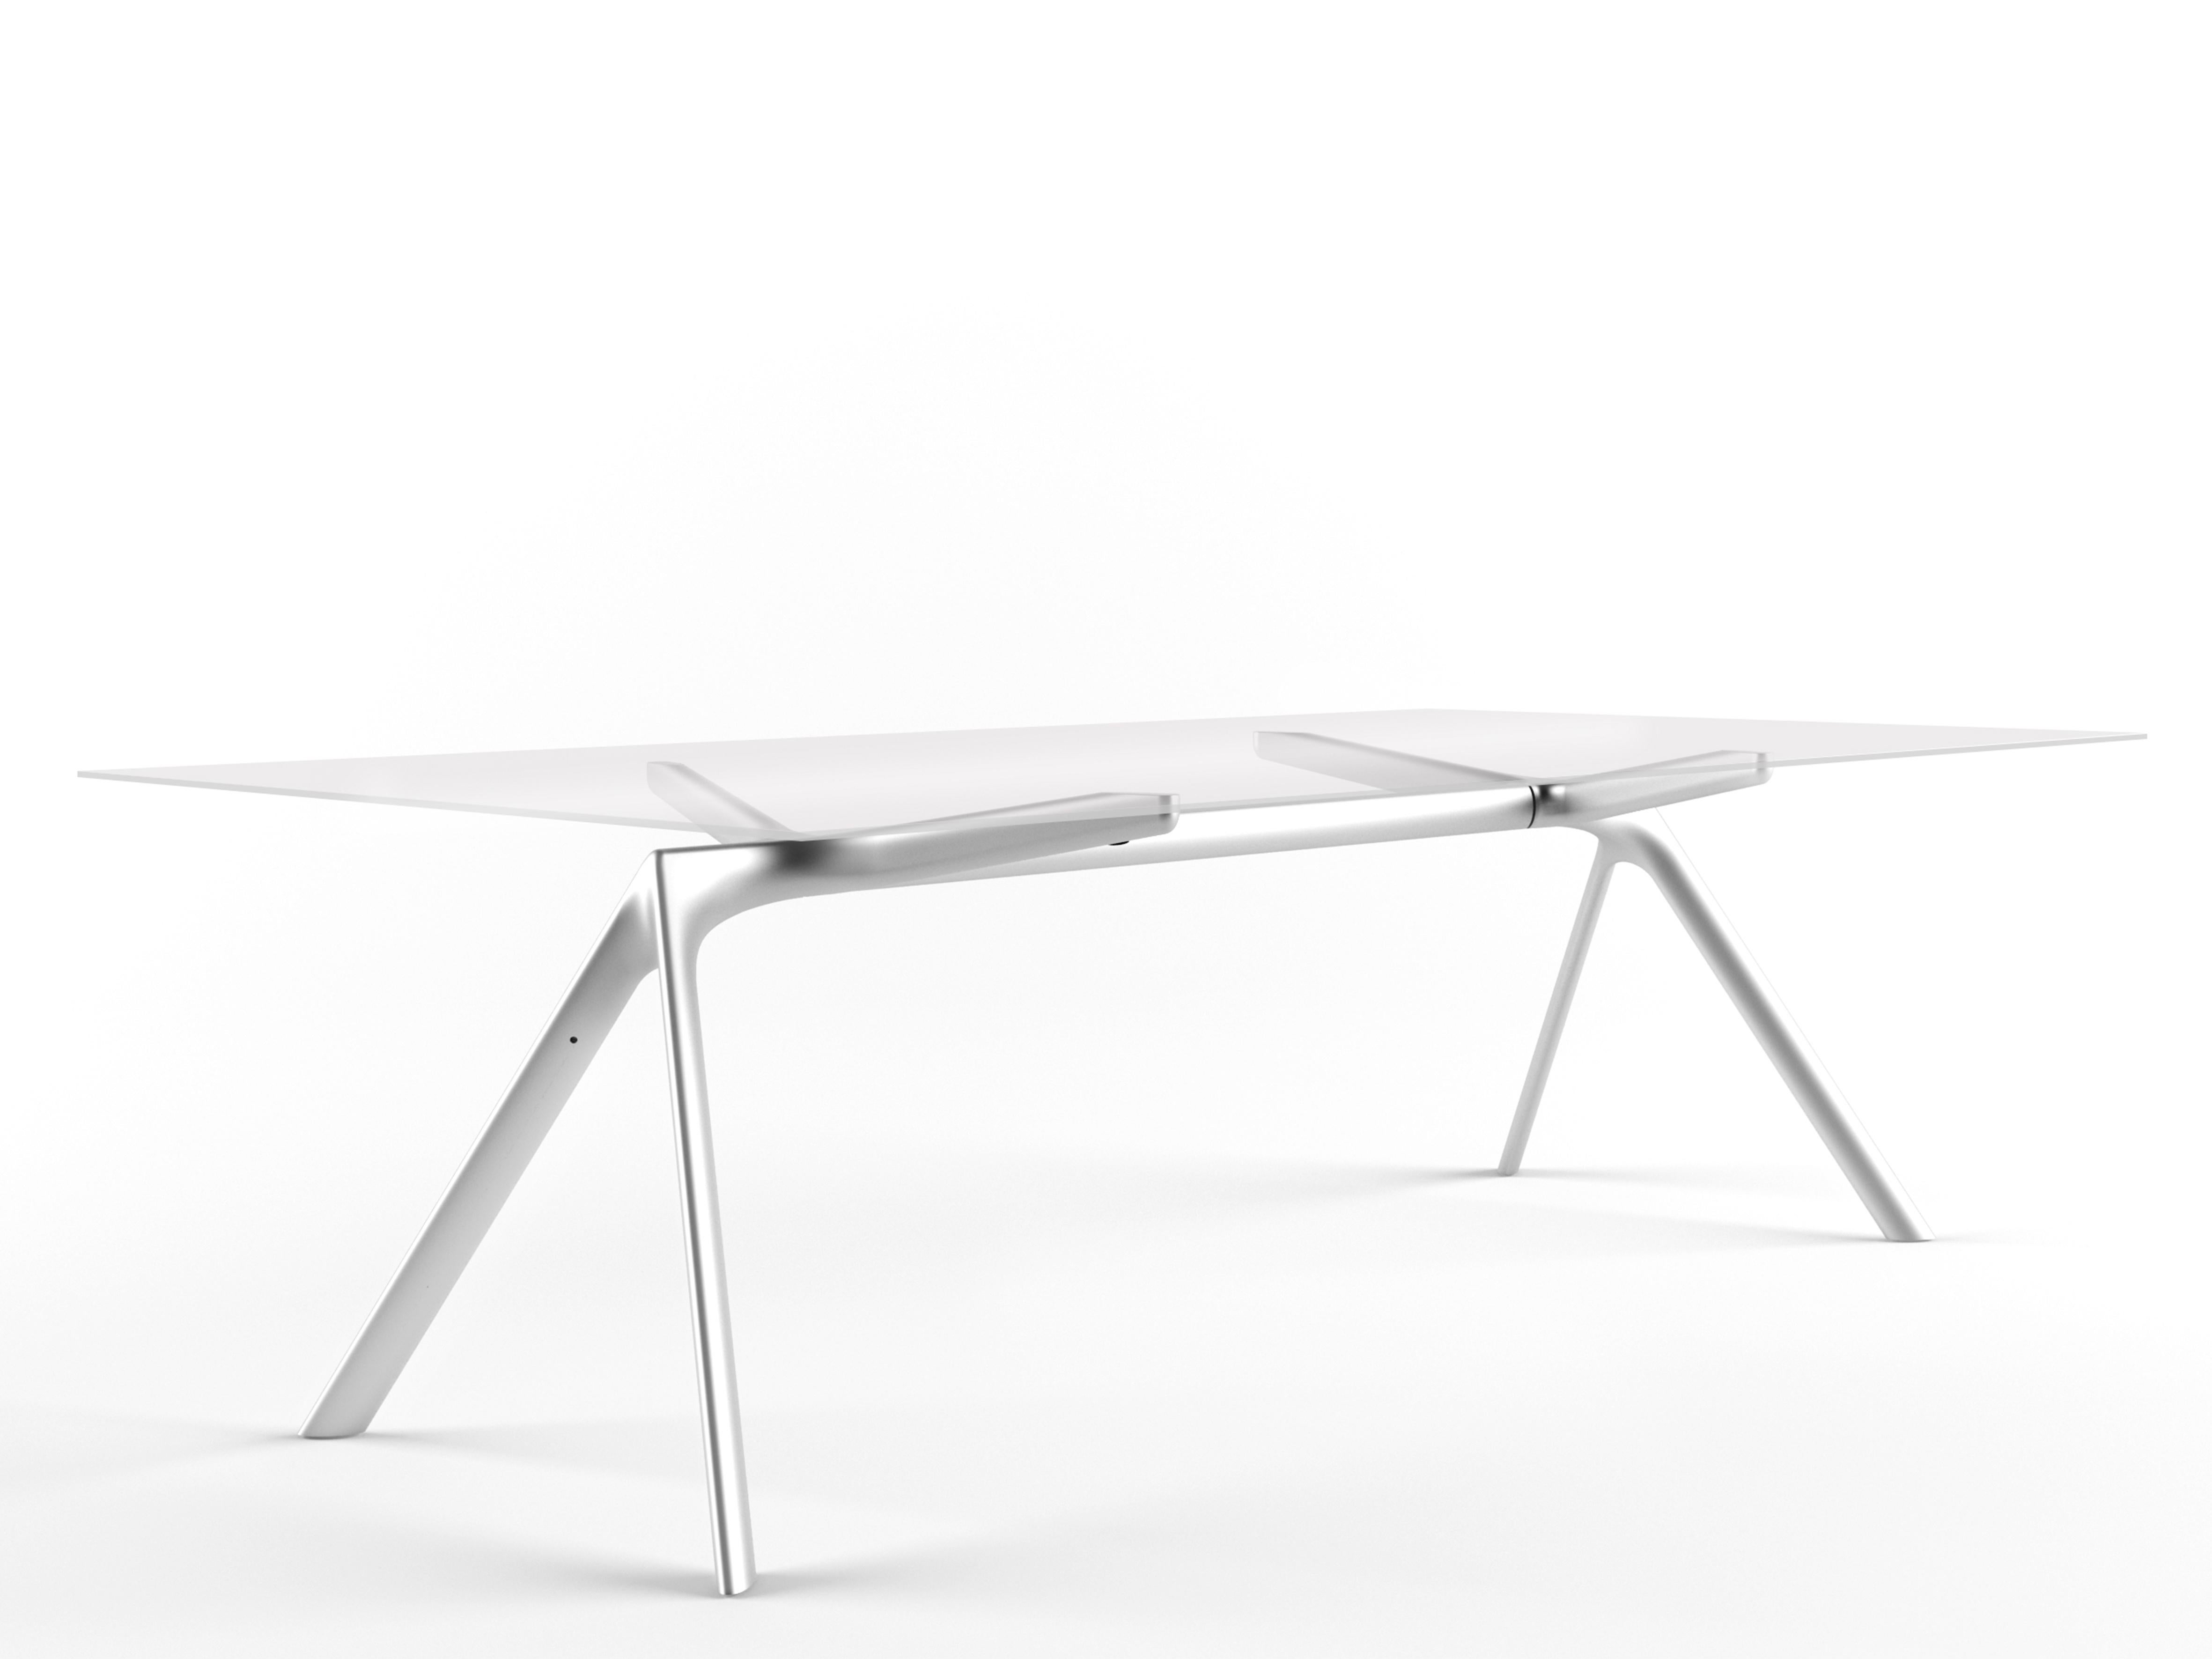 Alias Small 45A Dry Table in Glass Top with Anodised Silver Lacquered Aluminium Frame by Alberto Meda

Table with structure made of lacquered aluminium elements. Top in extra light tempered glass, thickness 10 mm. Available with predisposition for